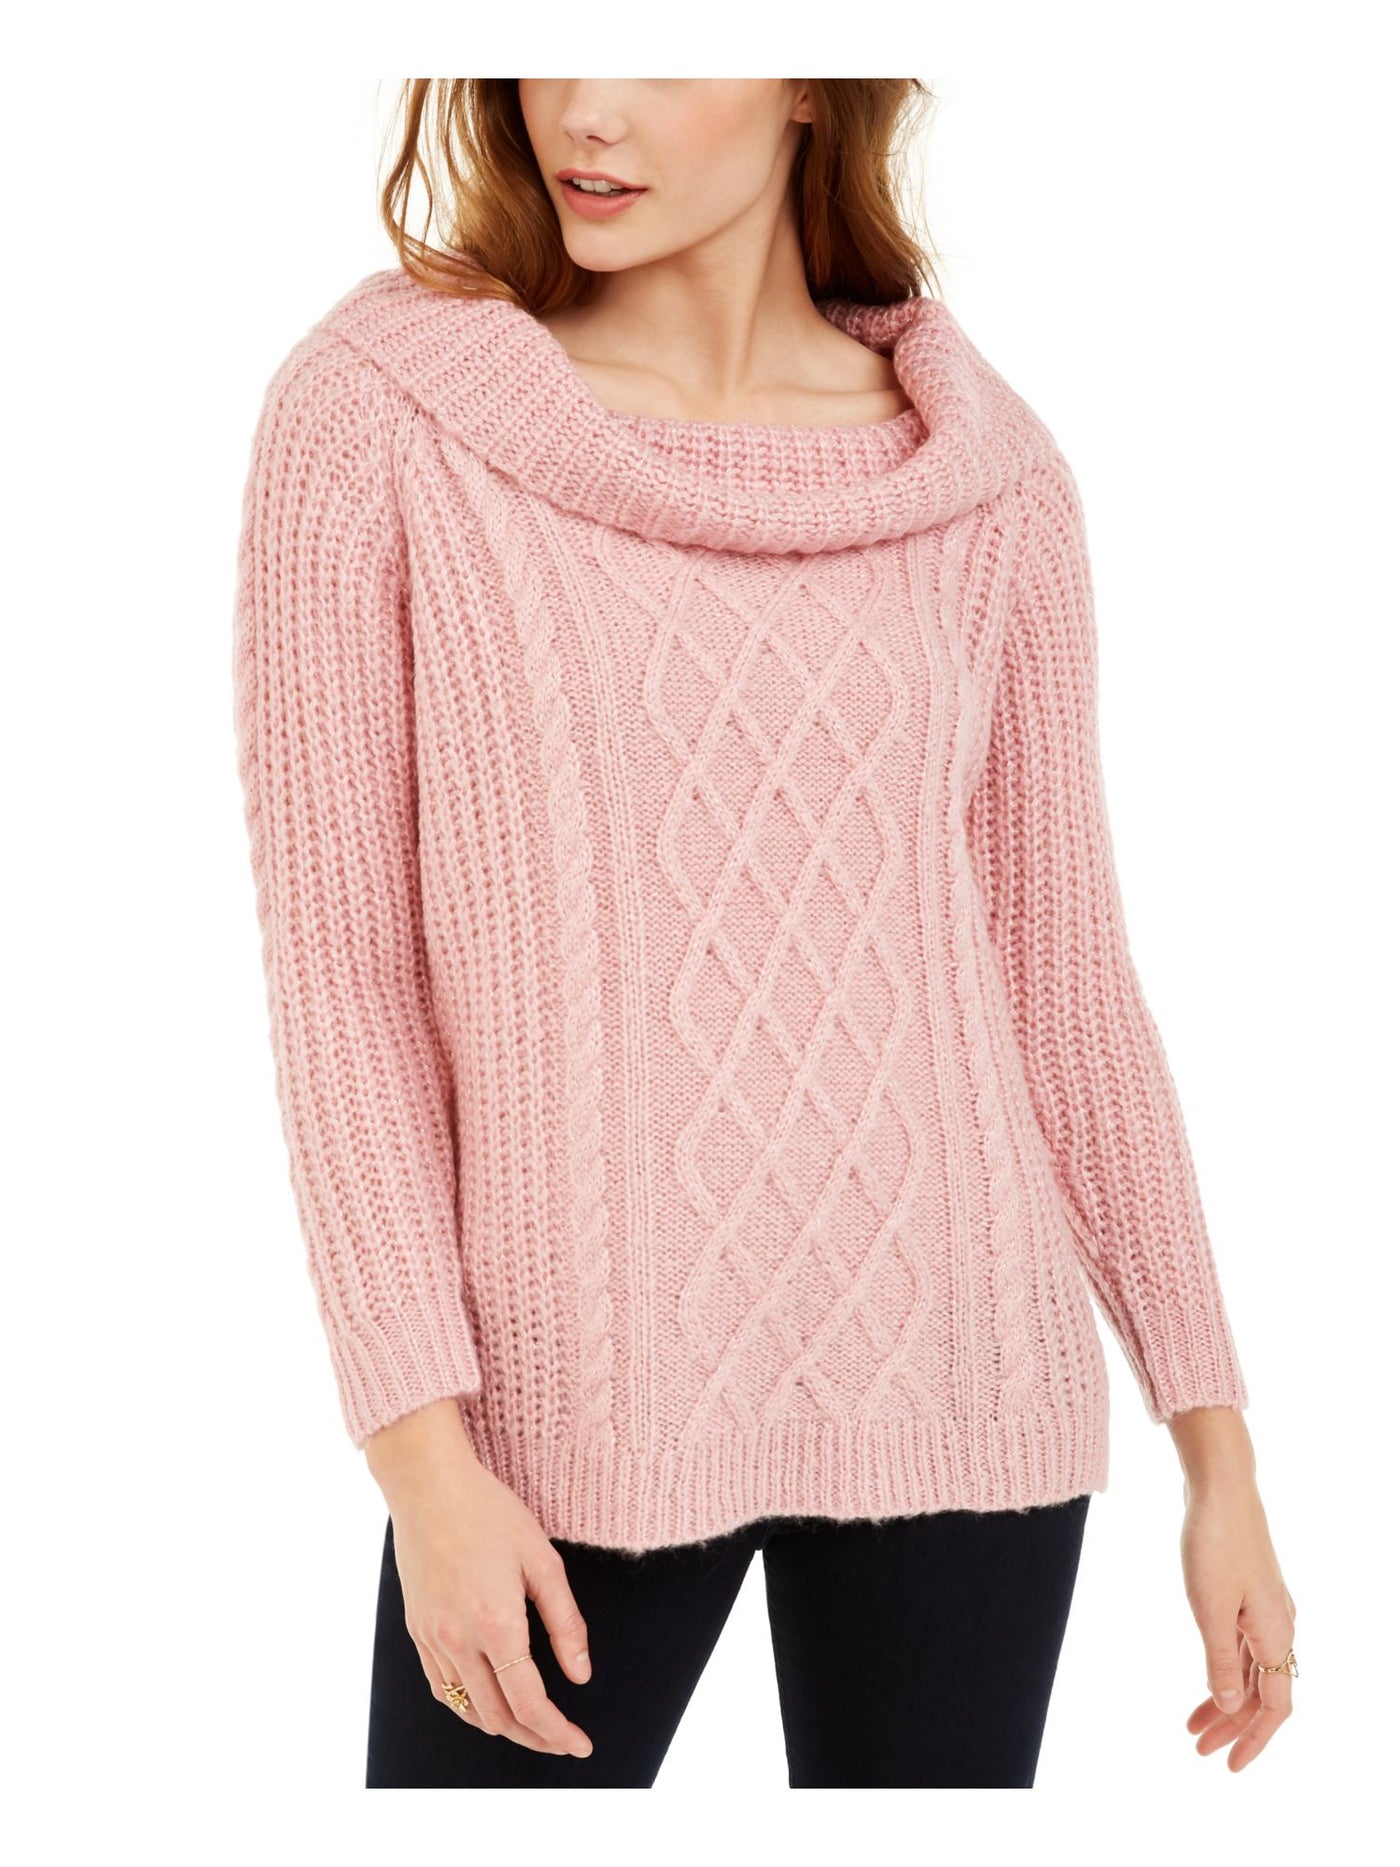 NO COMMENT Womens Pink Textured Patterned Long Sleeve Cowl Neck Sweater XL